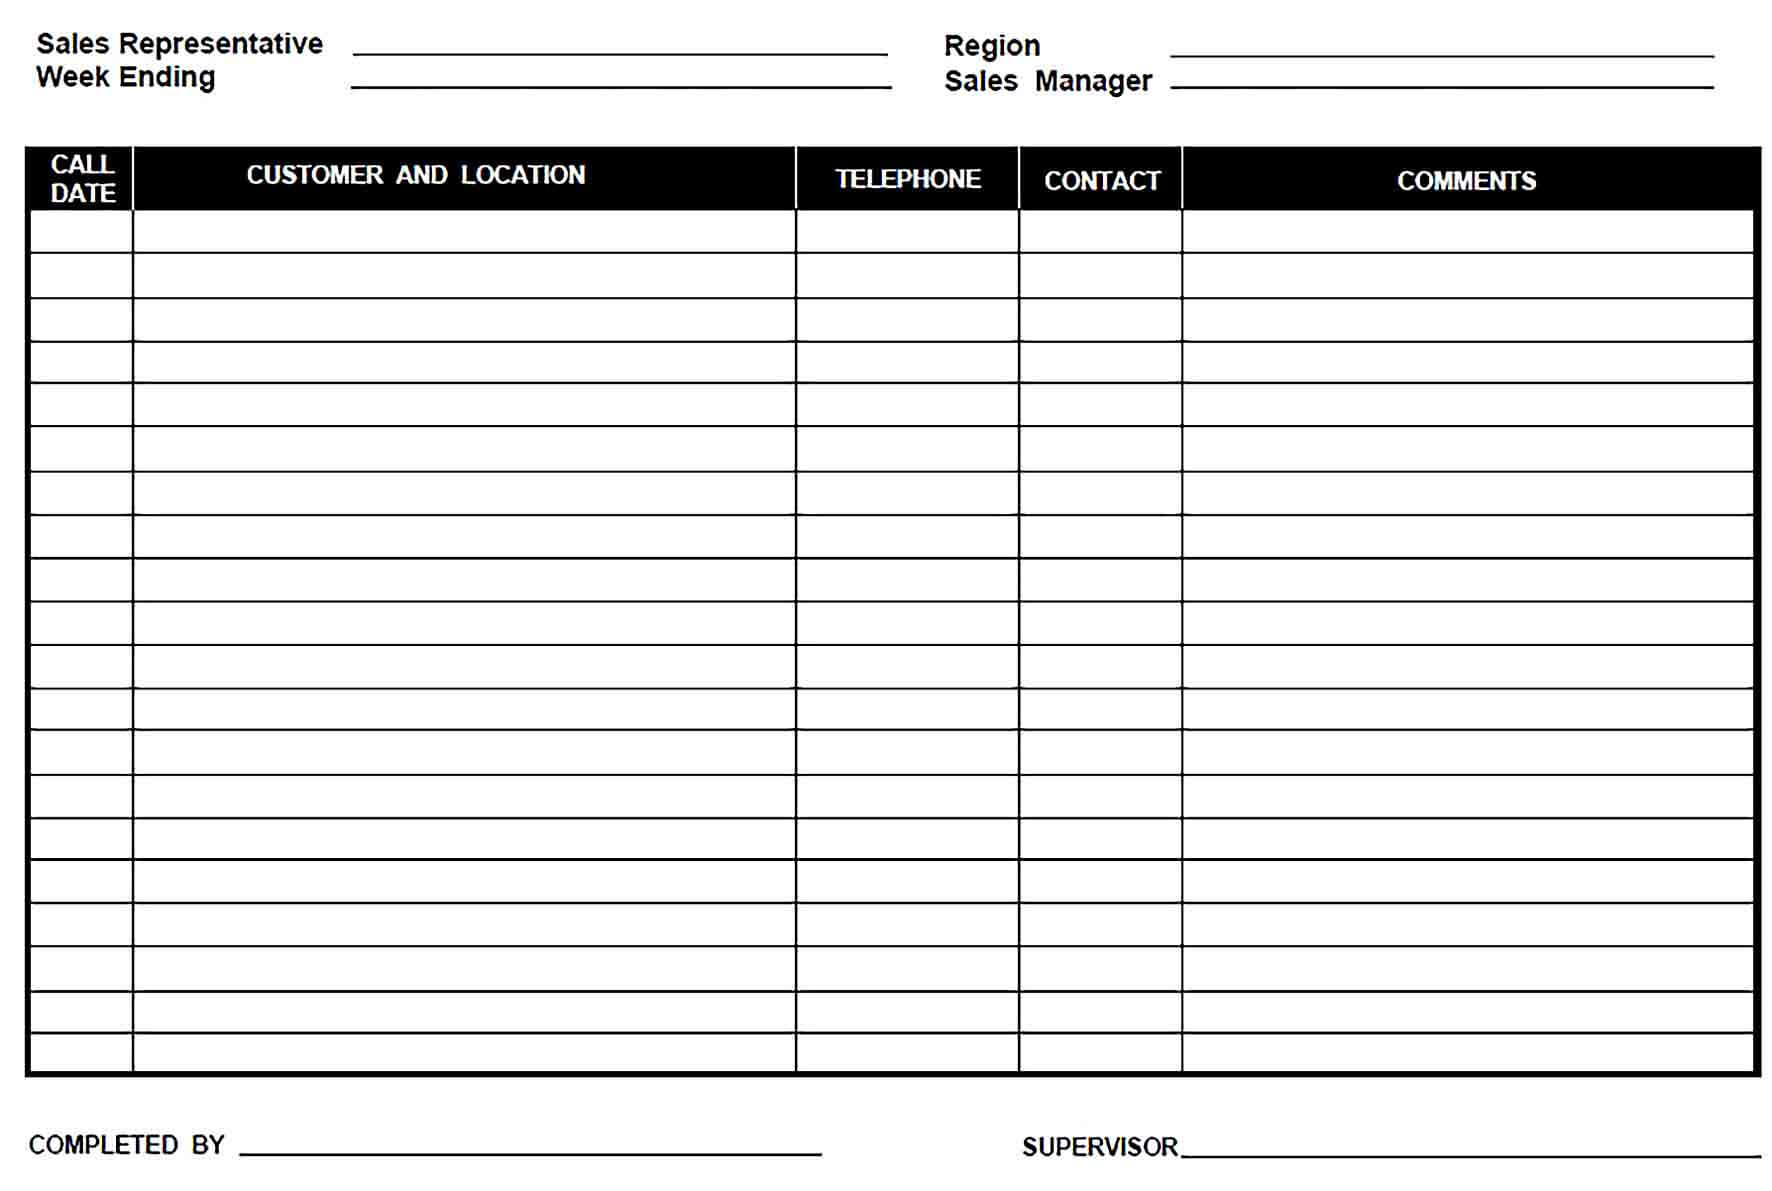 Sample Weekly Sales Call Report Template